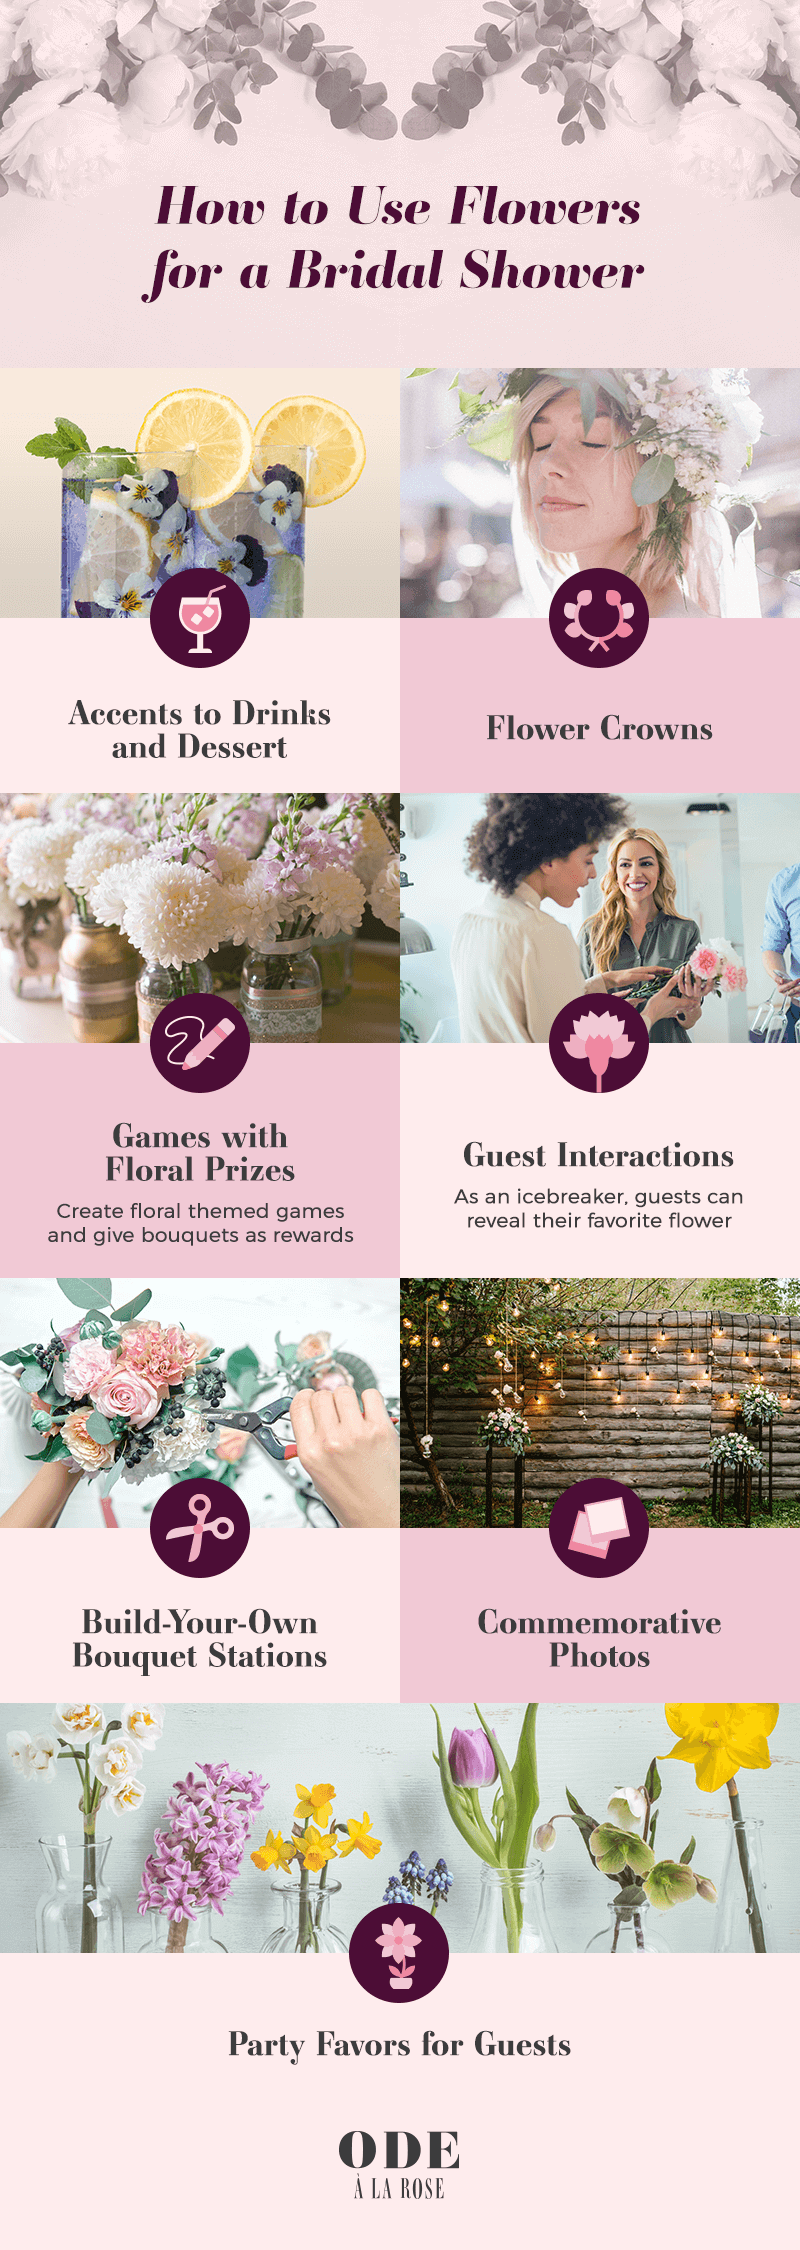 how to use flowers at bridal shower